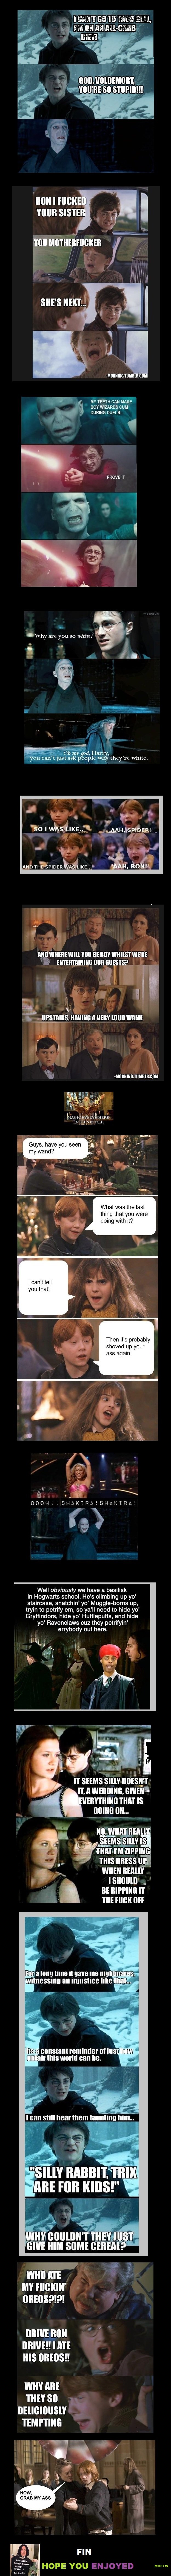 Harry Potter Compilation of lulz. For the lulz. please thumb either way . cnml BE so ', ltr. f m TEENIE CAN MAKE A Bor WIZARDS cum DURING DUES PROVE IT 41 t e O